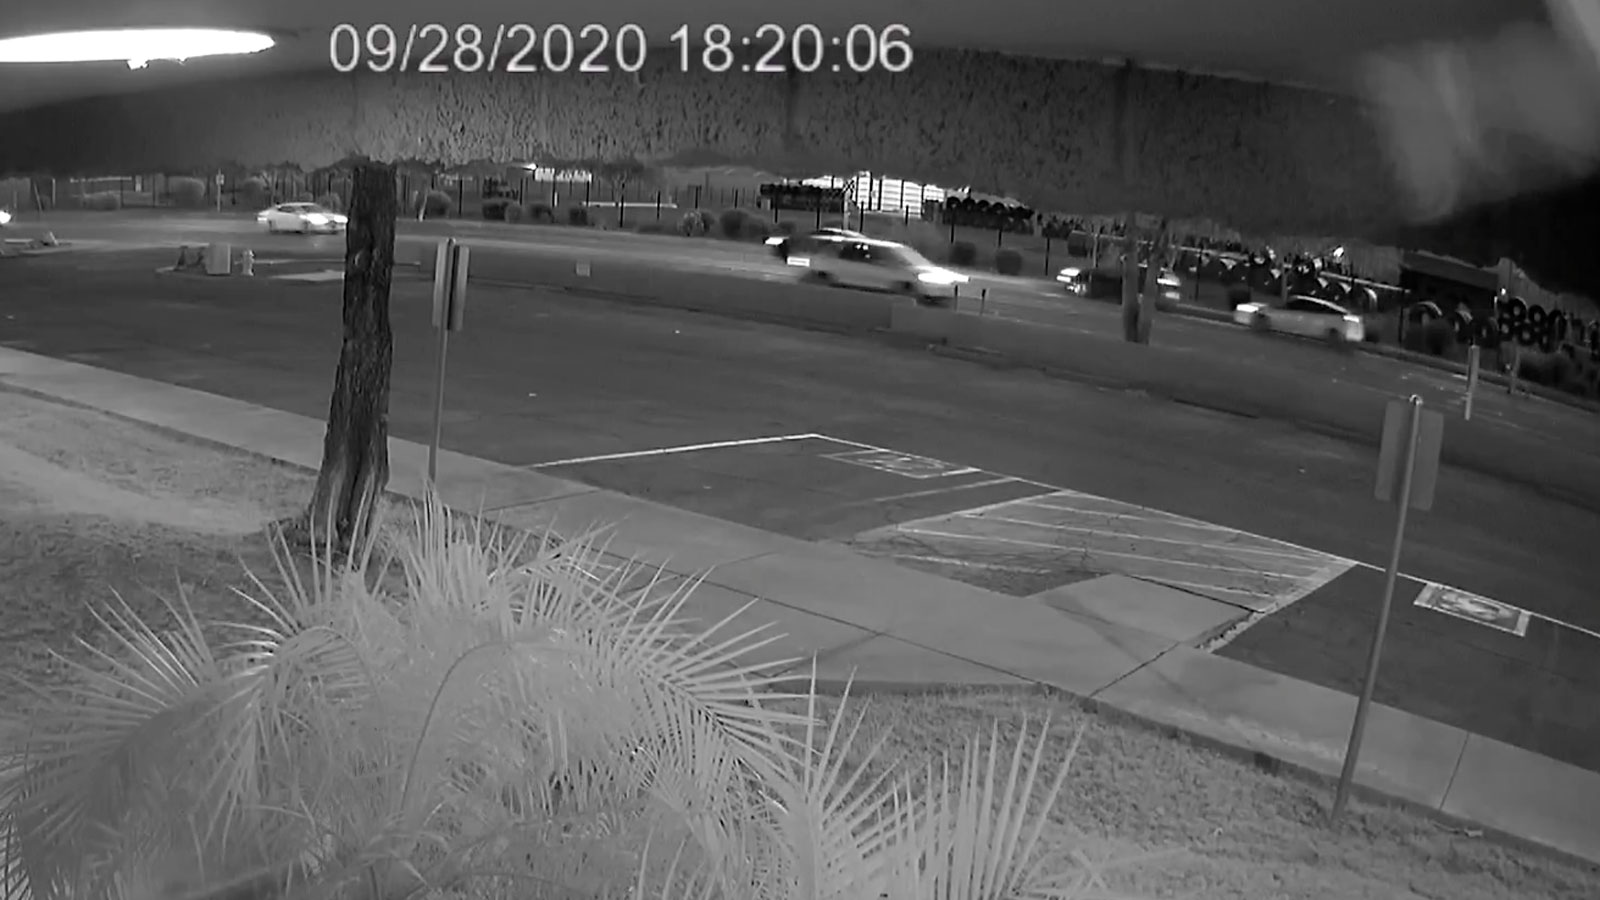 Glendale police seek public's help in identifying driver of fatal hit-and-run in 2020